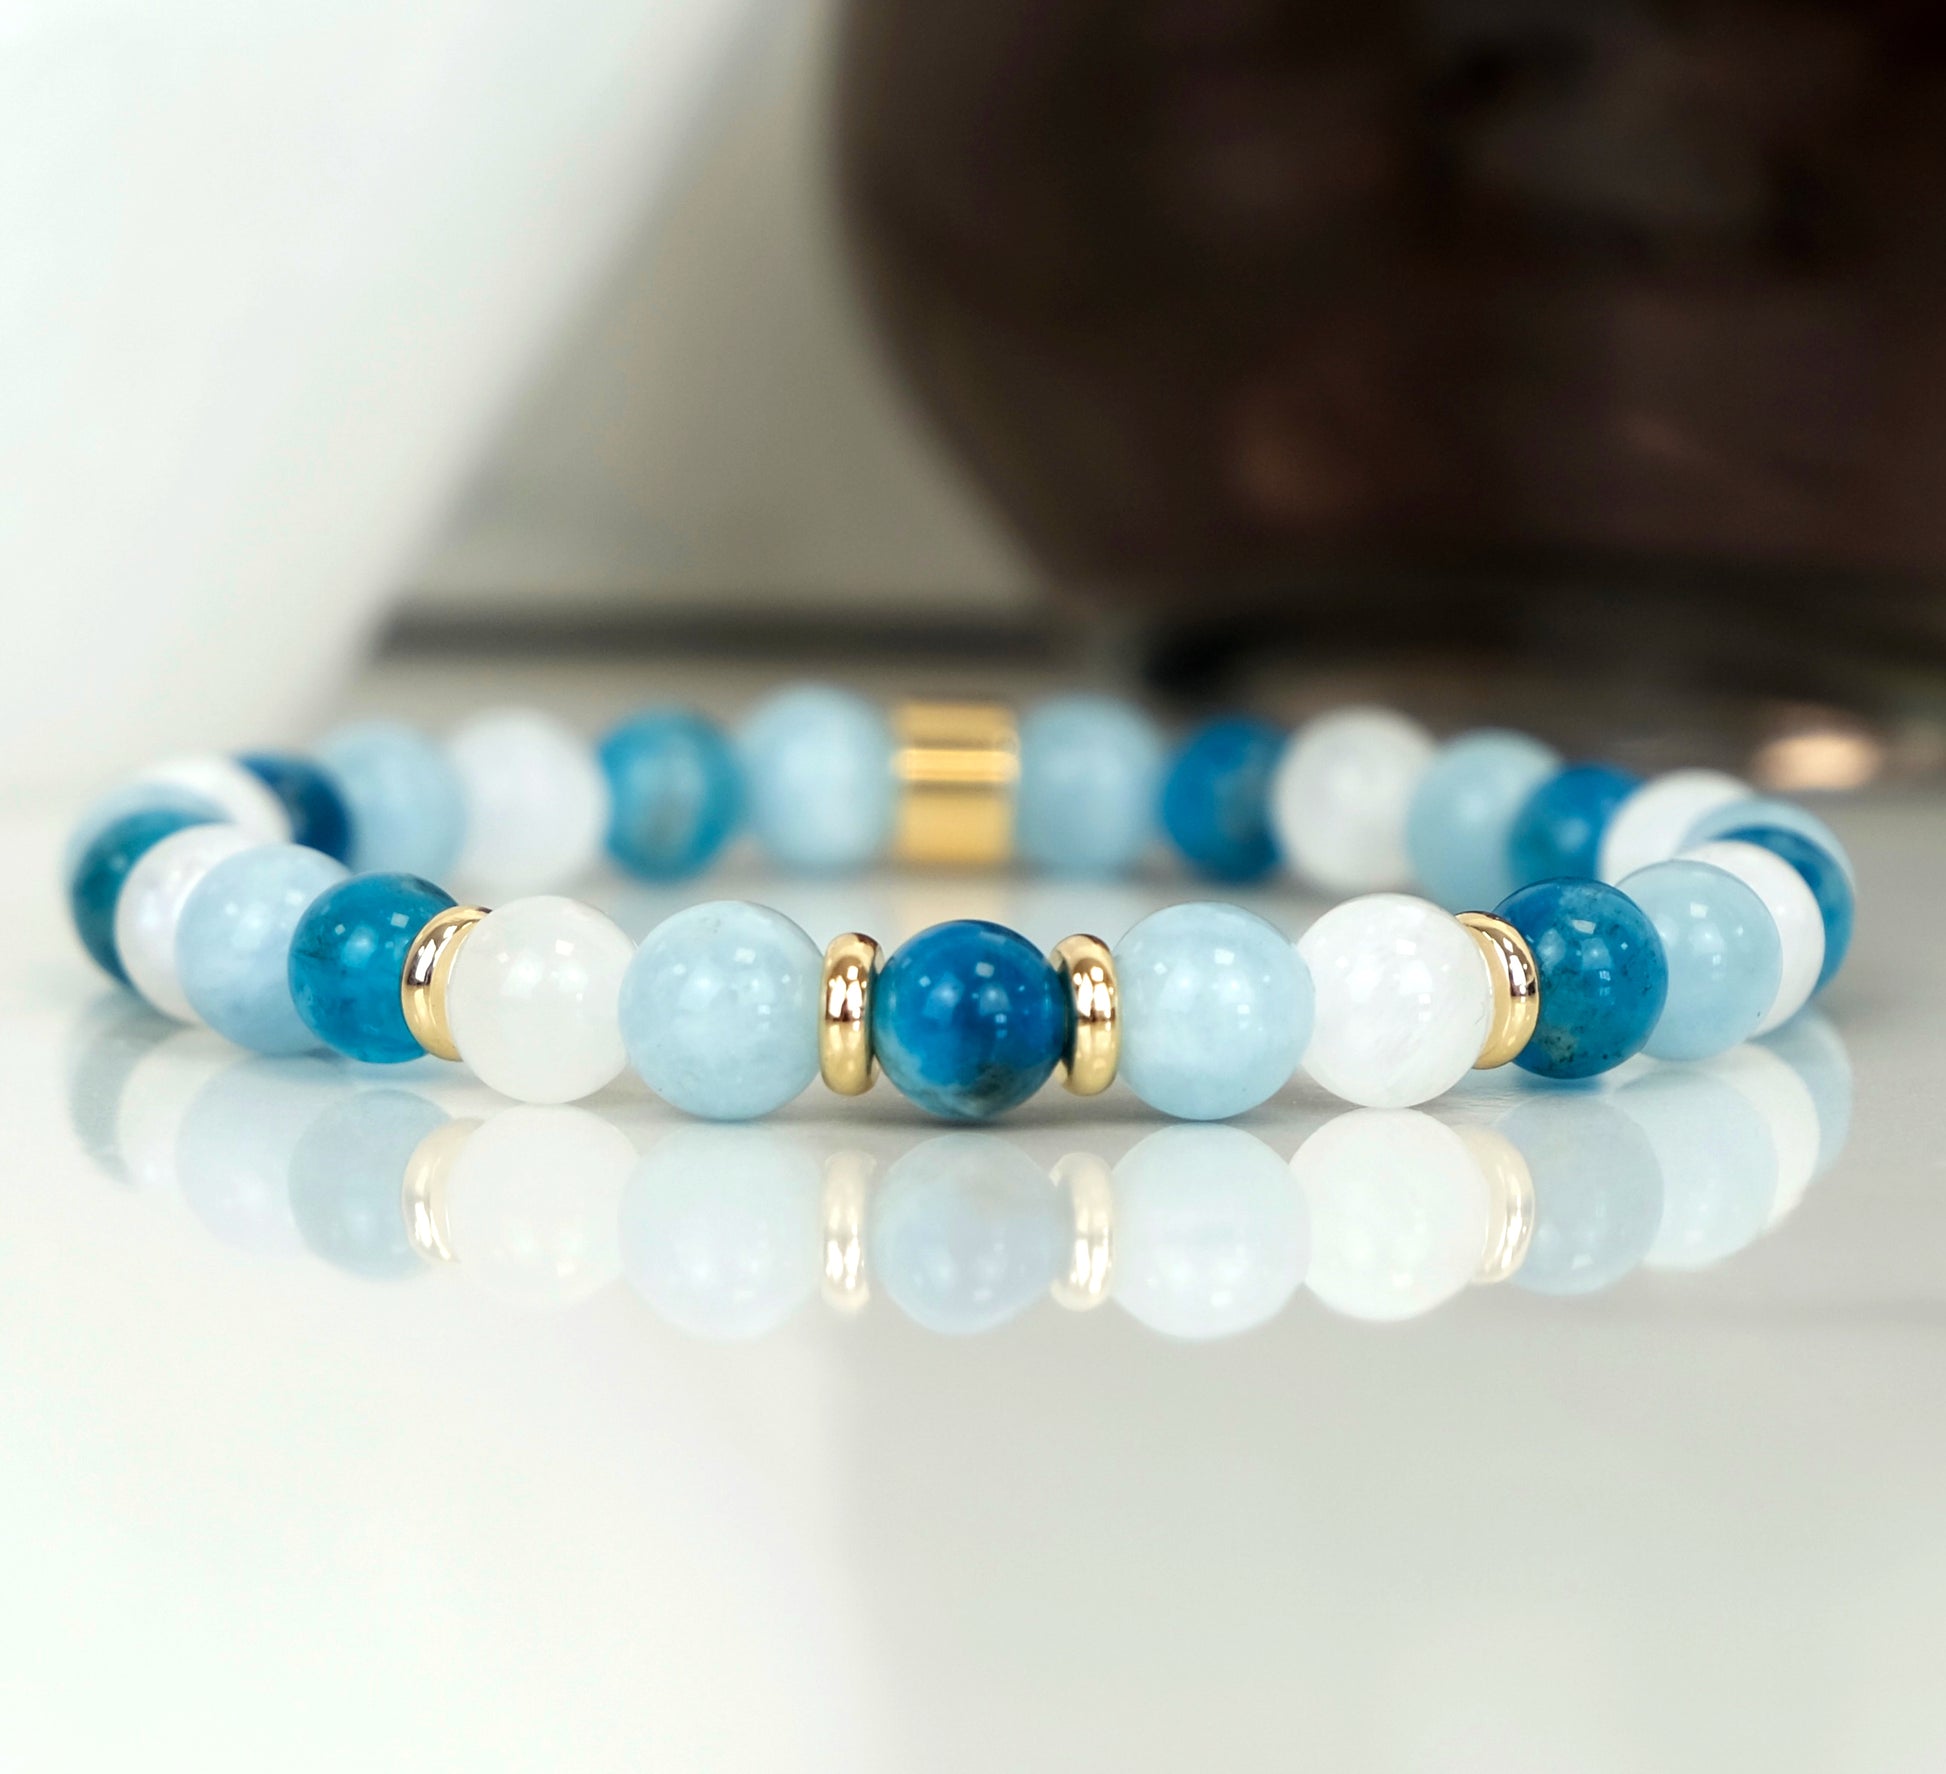 6mm Apatite Moonstone and Aquamarine Bracelet with gold accessories